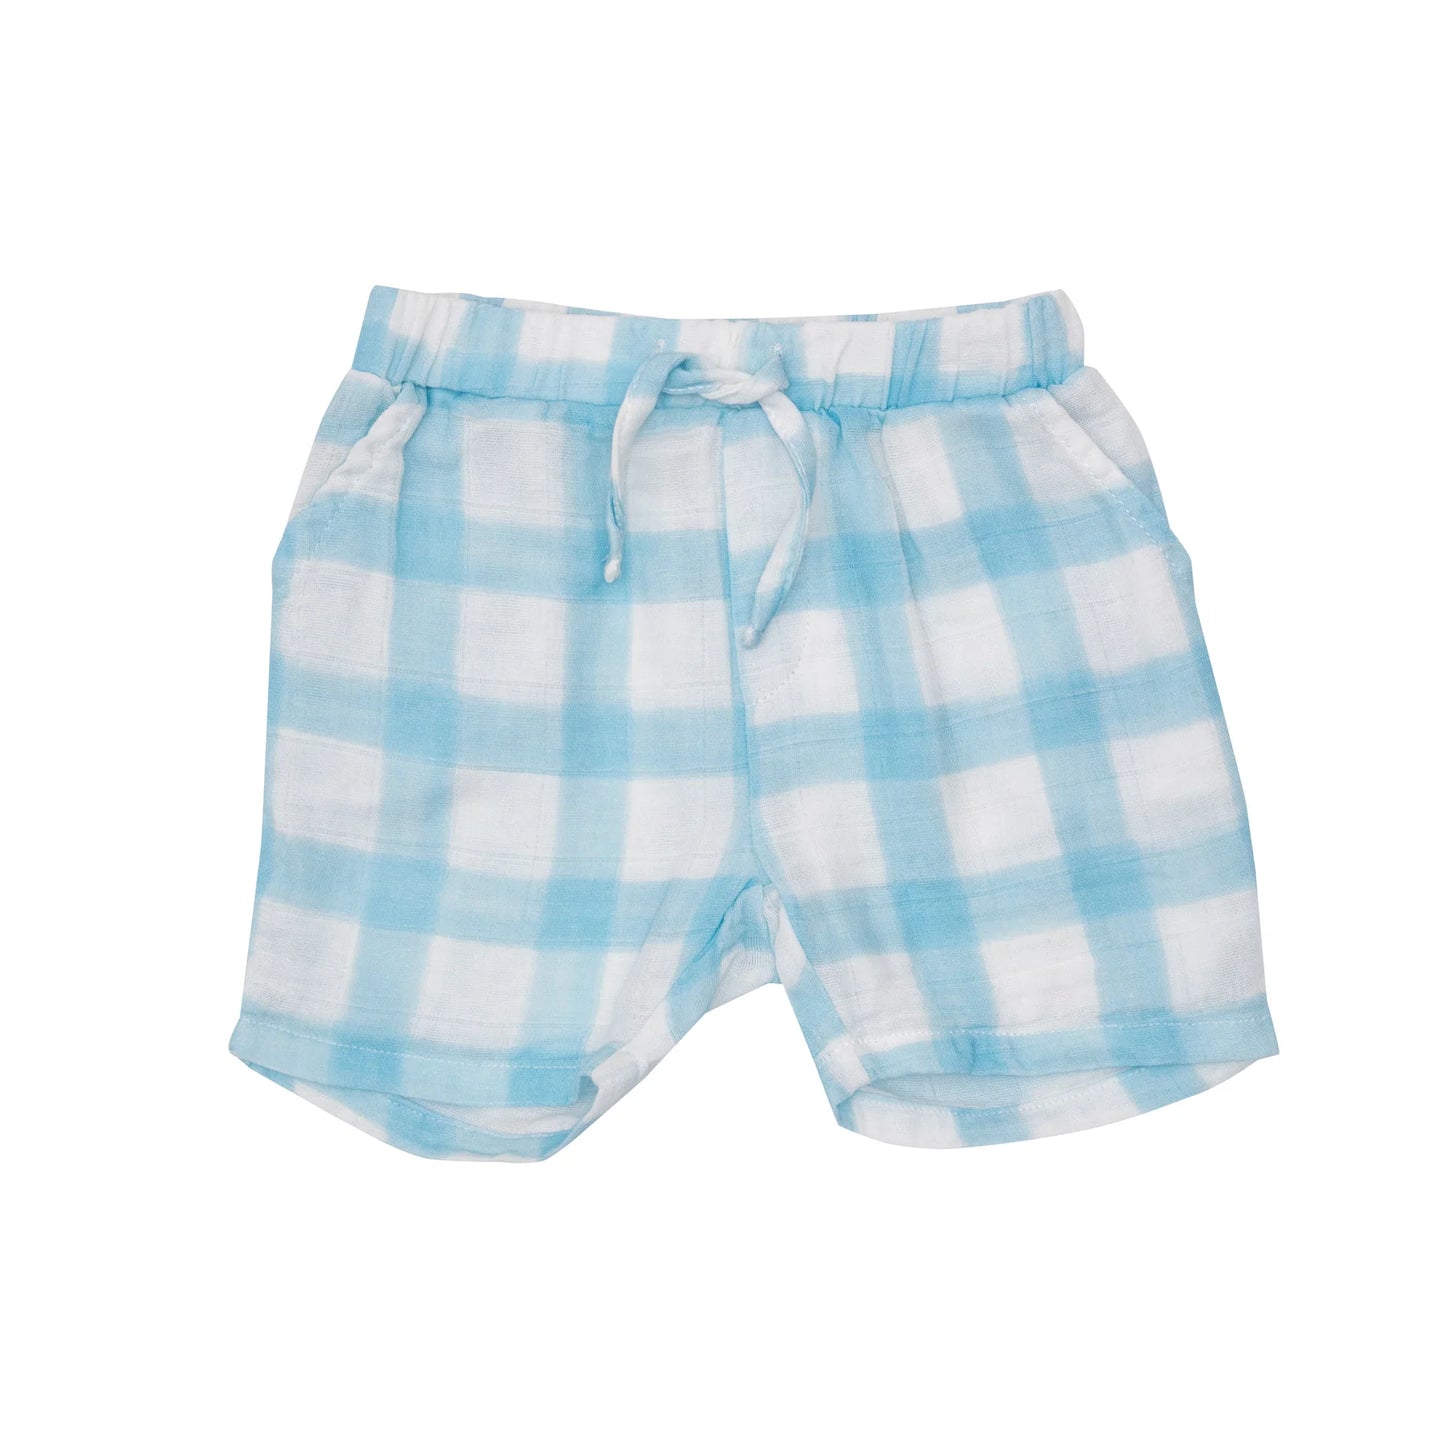 Painted Gingham Blue Muslin Shorts